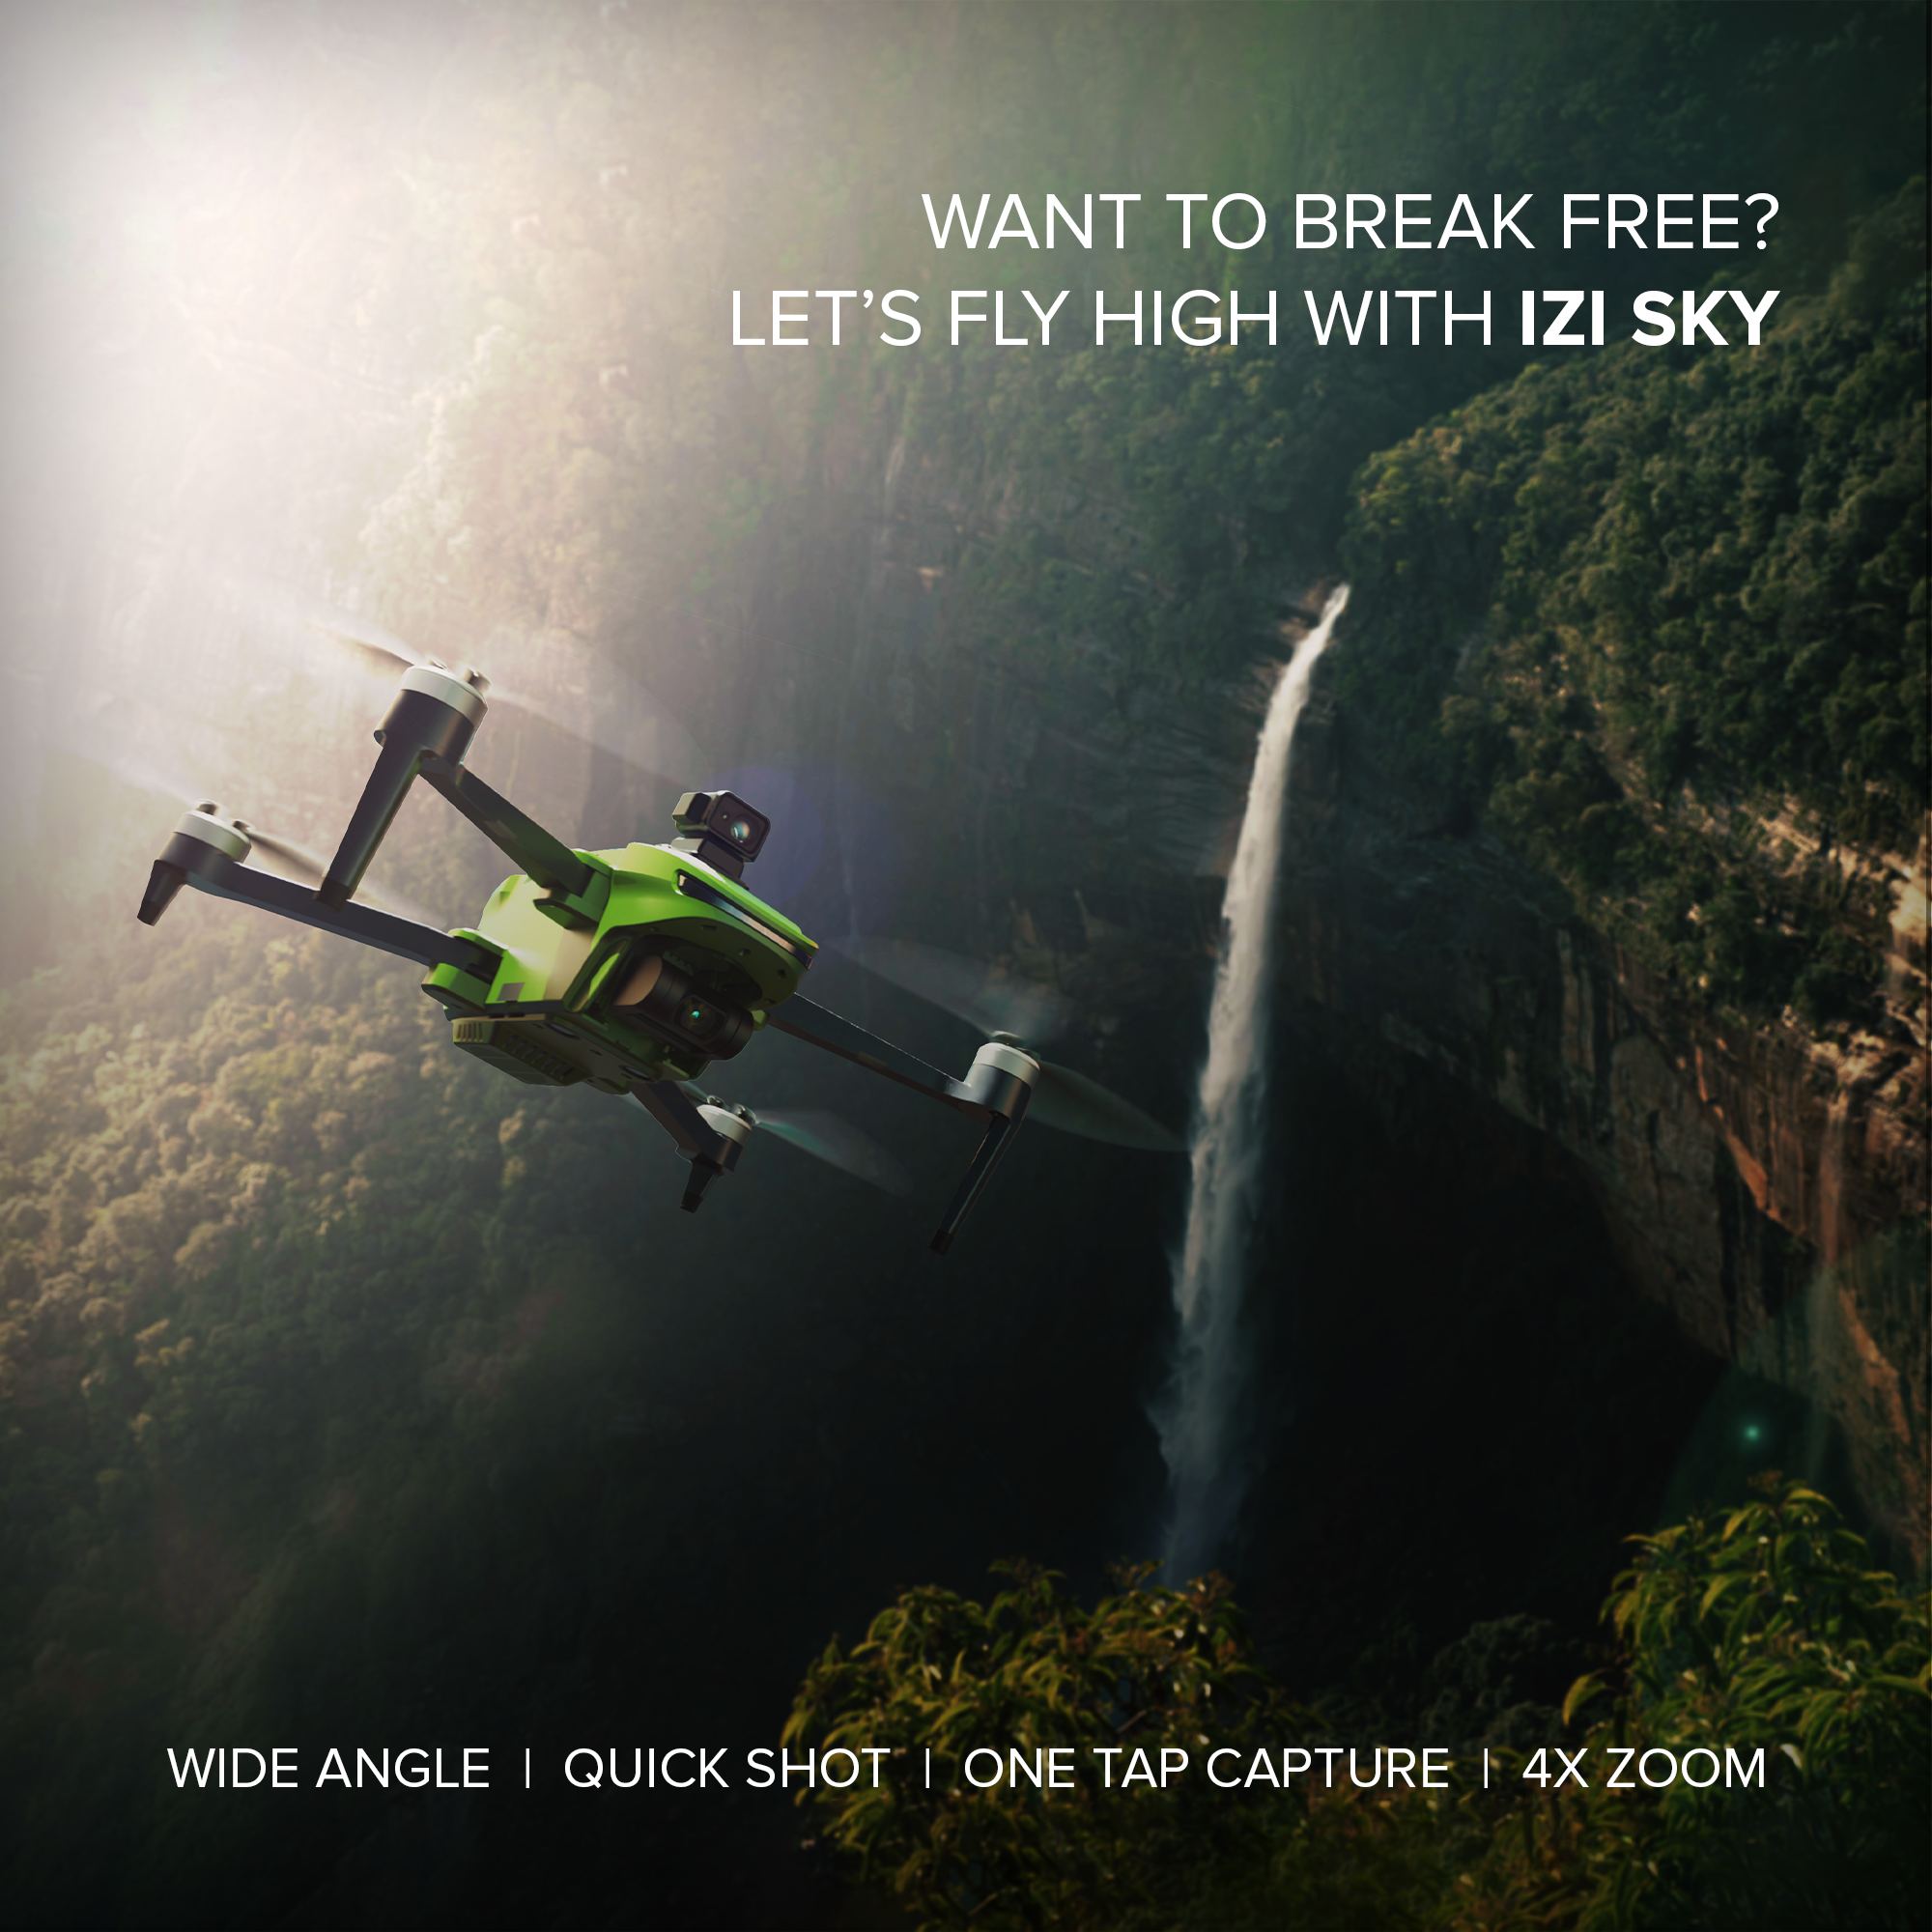 IZI Sky Drone: Do’s and Don’ts of Flying Your Drone